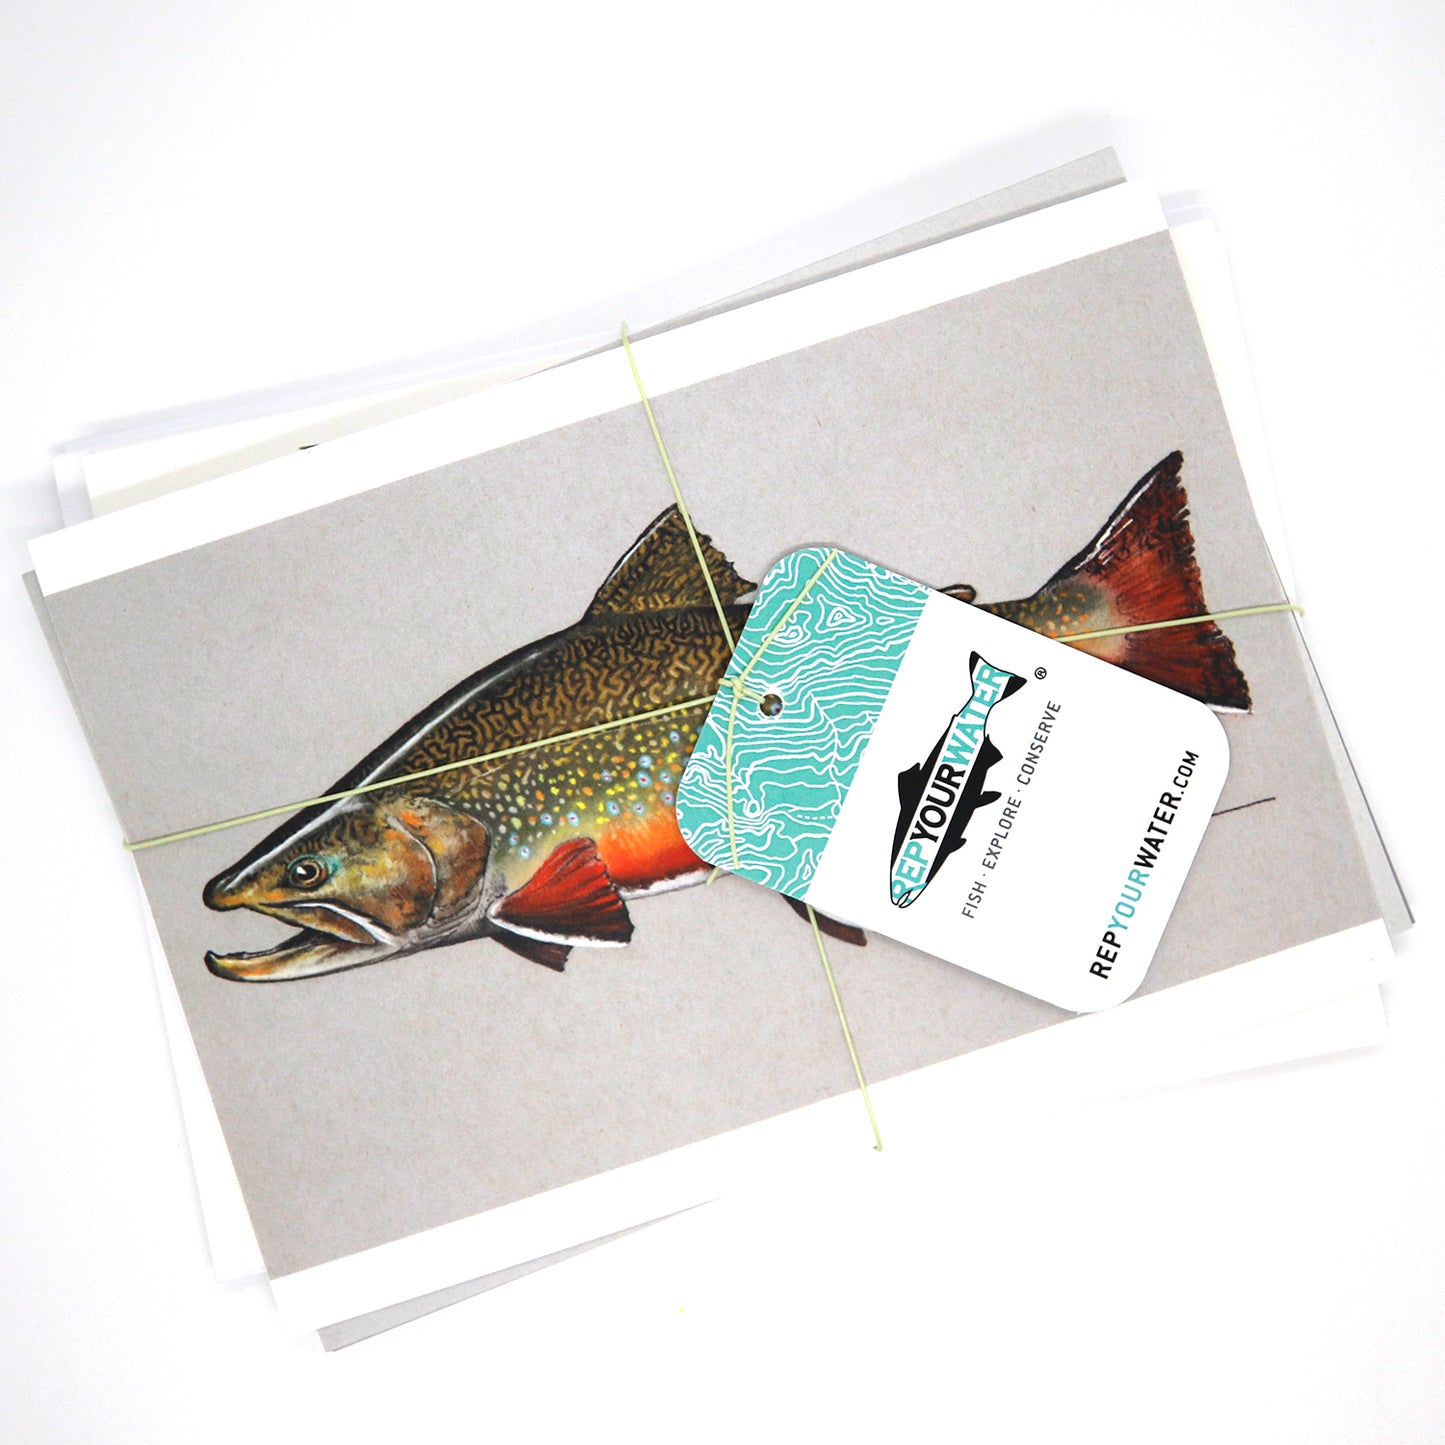 One stack of greeting cards with the same hangtag in the first image.  This only shows the brook trout greeting card.